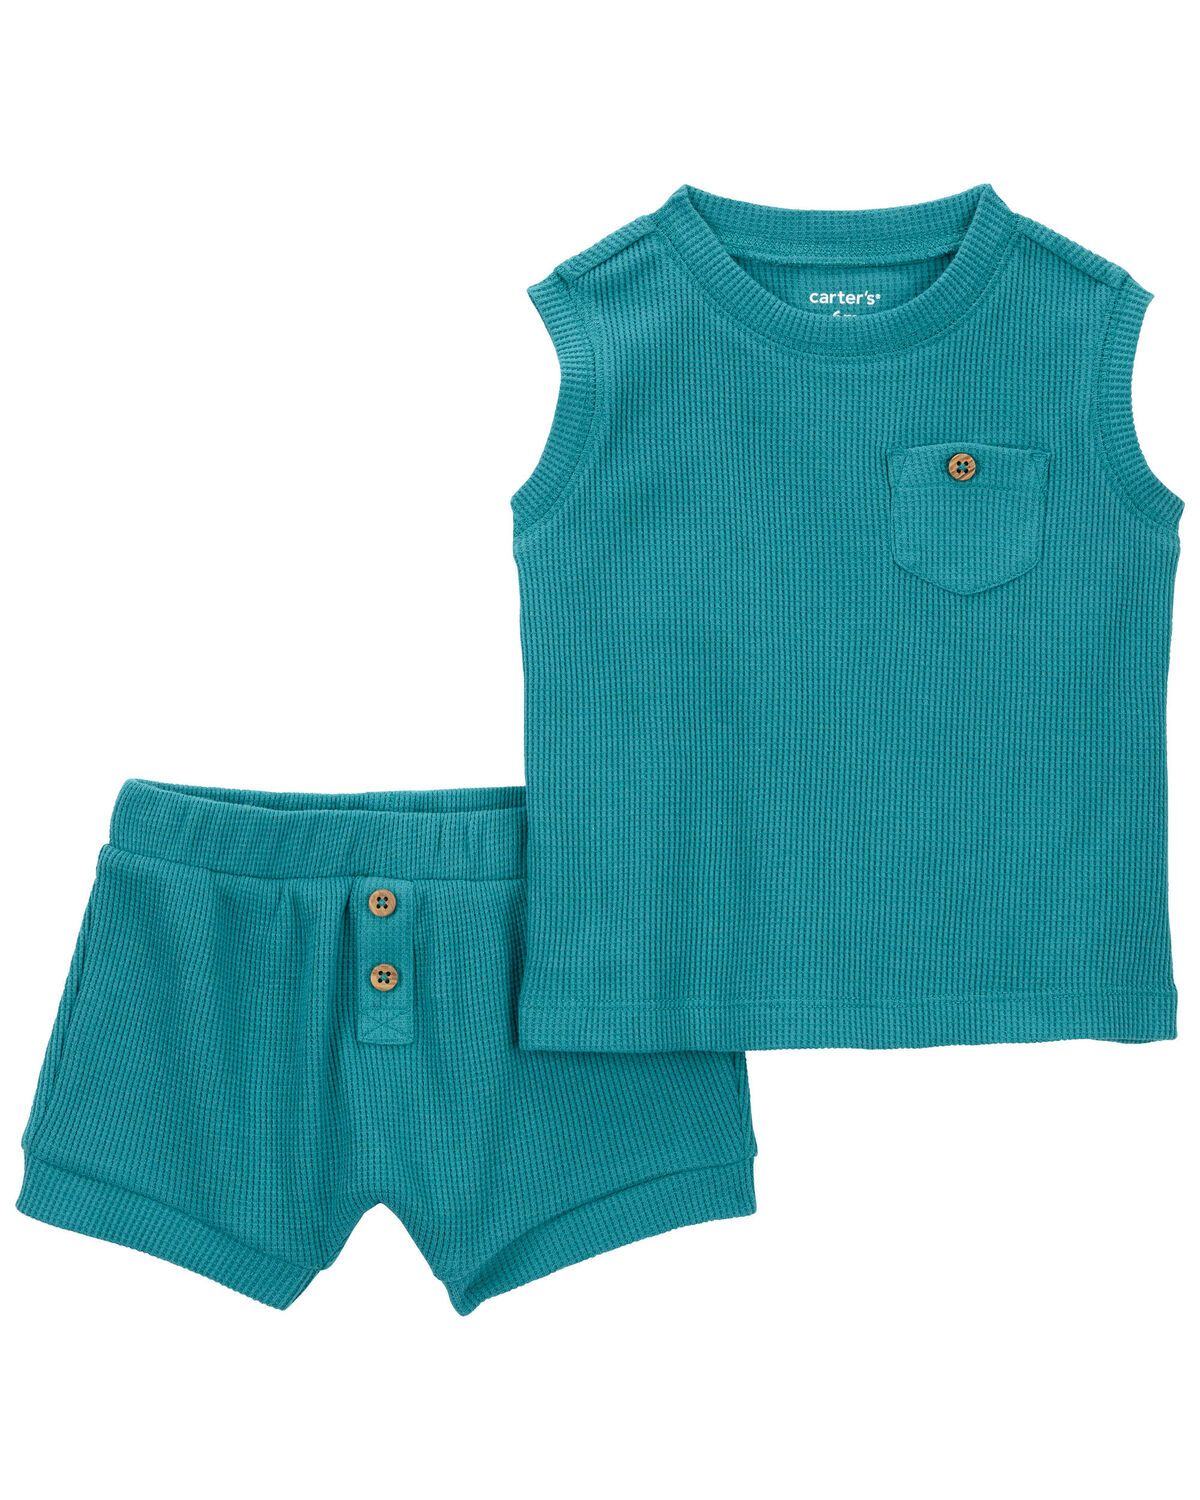 Baby 2-Piece Ribbed Outfit Set | Carter's